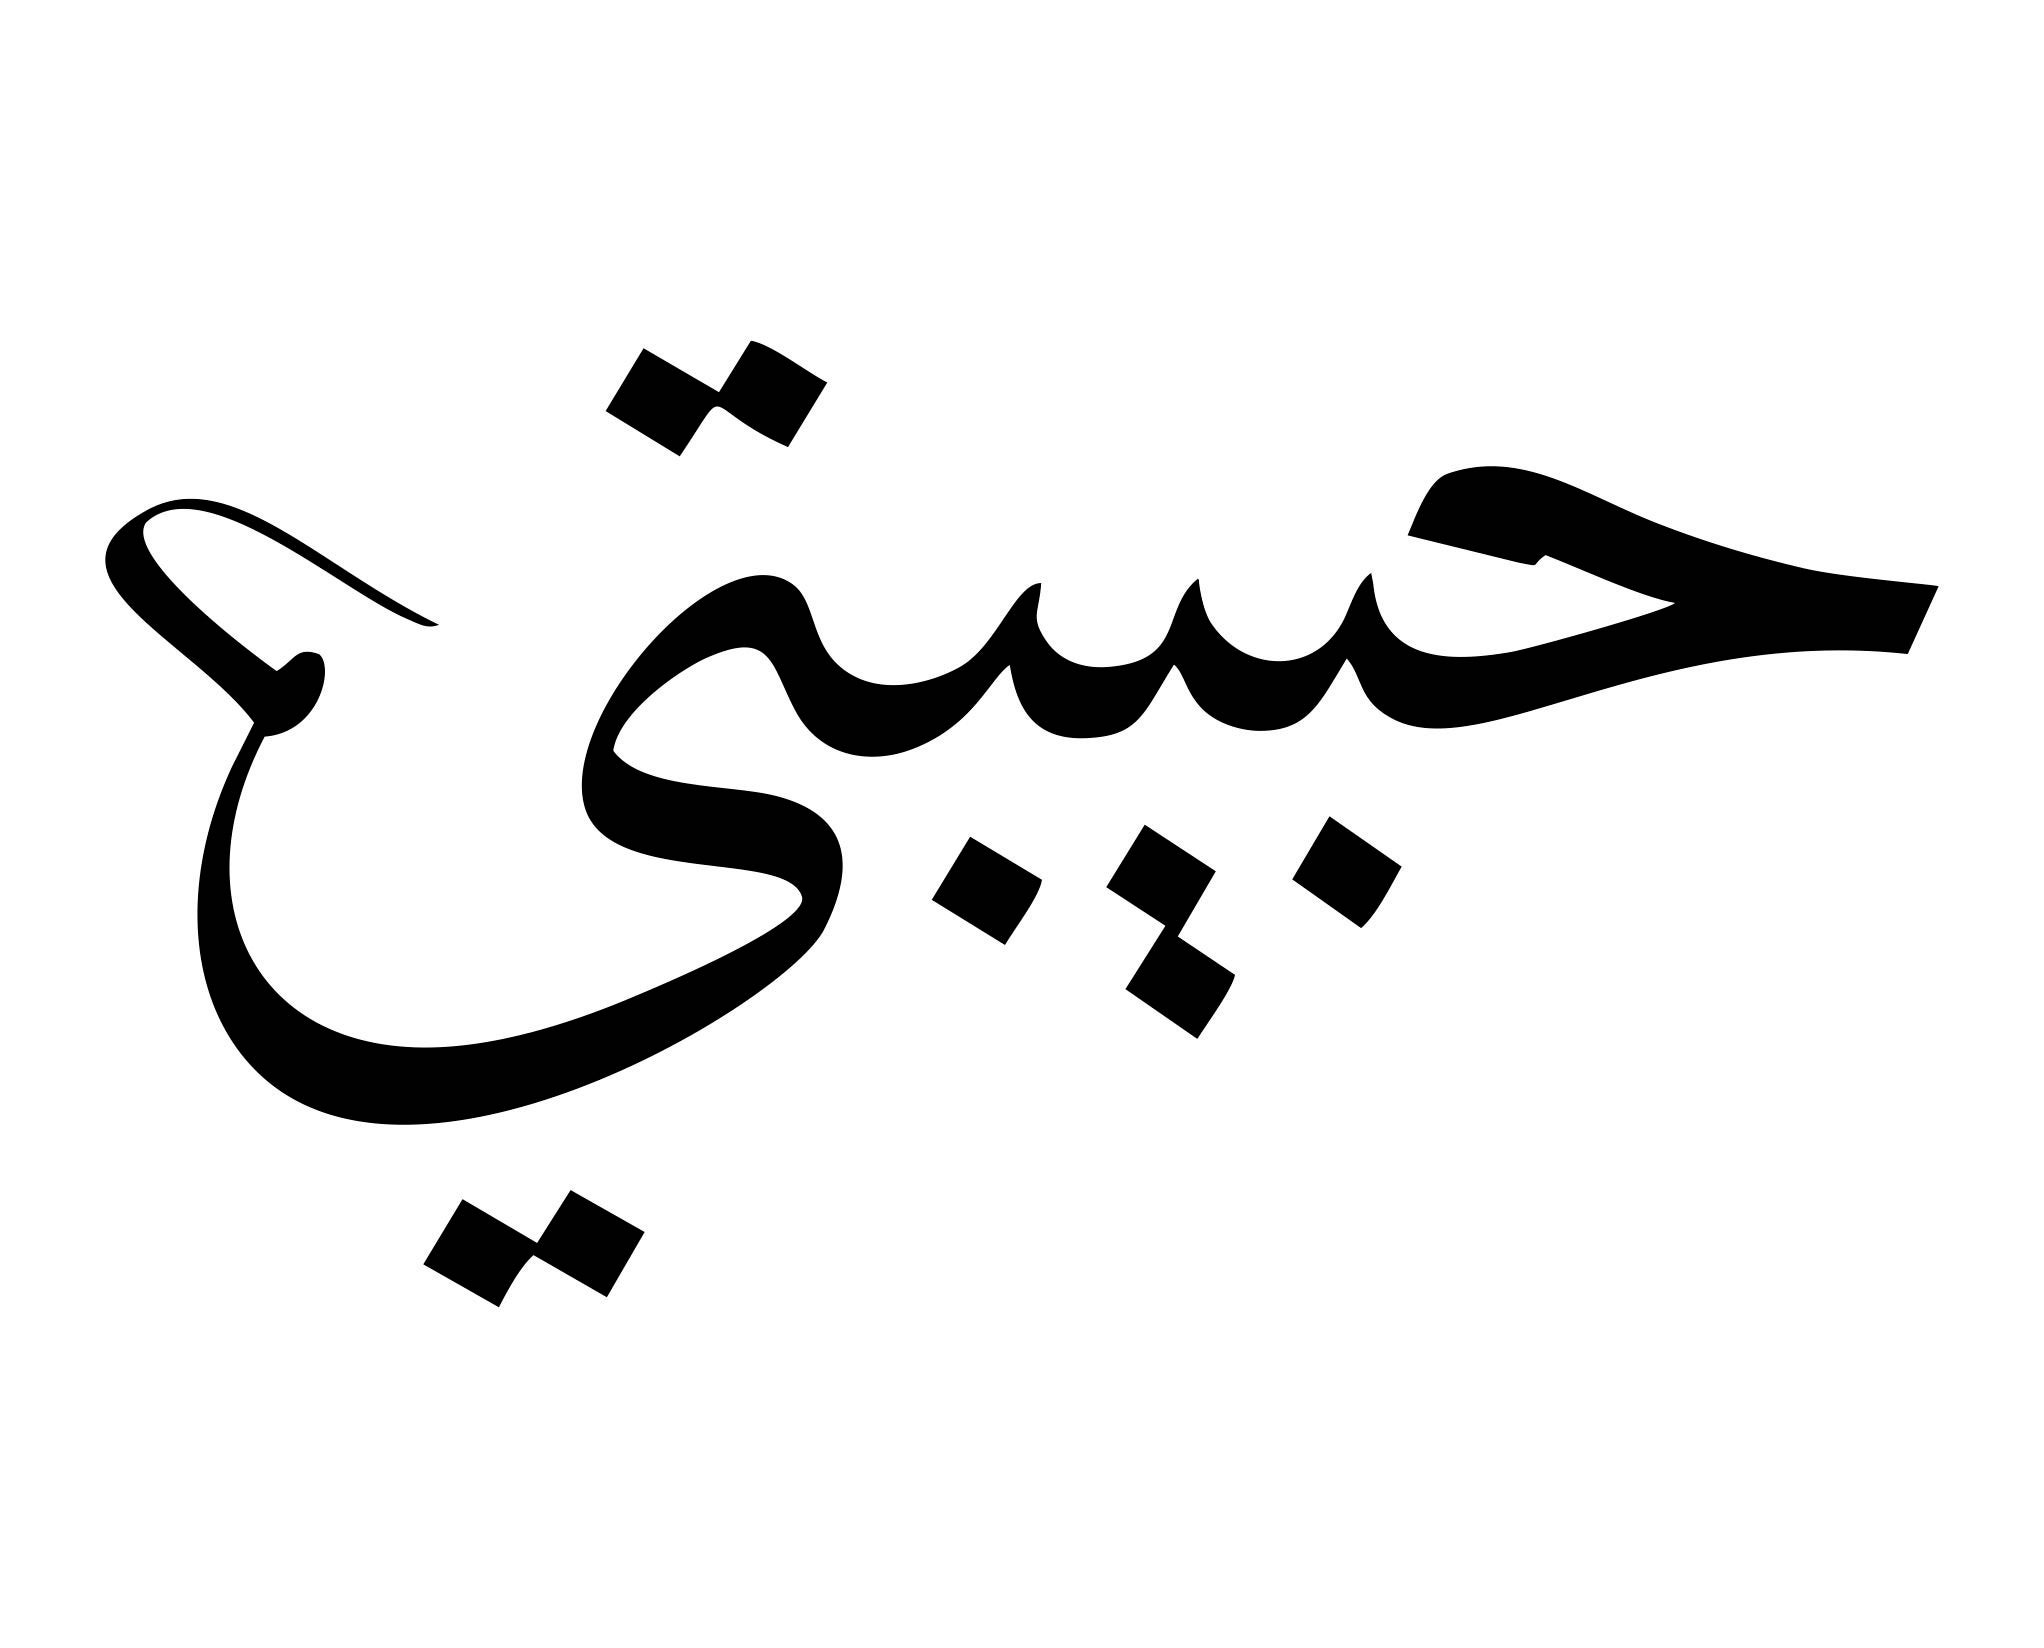 Habibti my Love in Arabic Downloadable SVG File for Use on Stationery ...